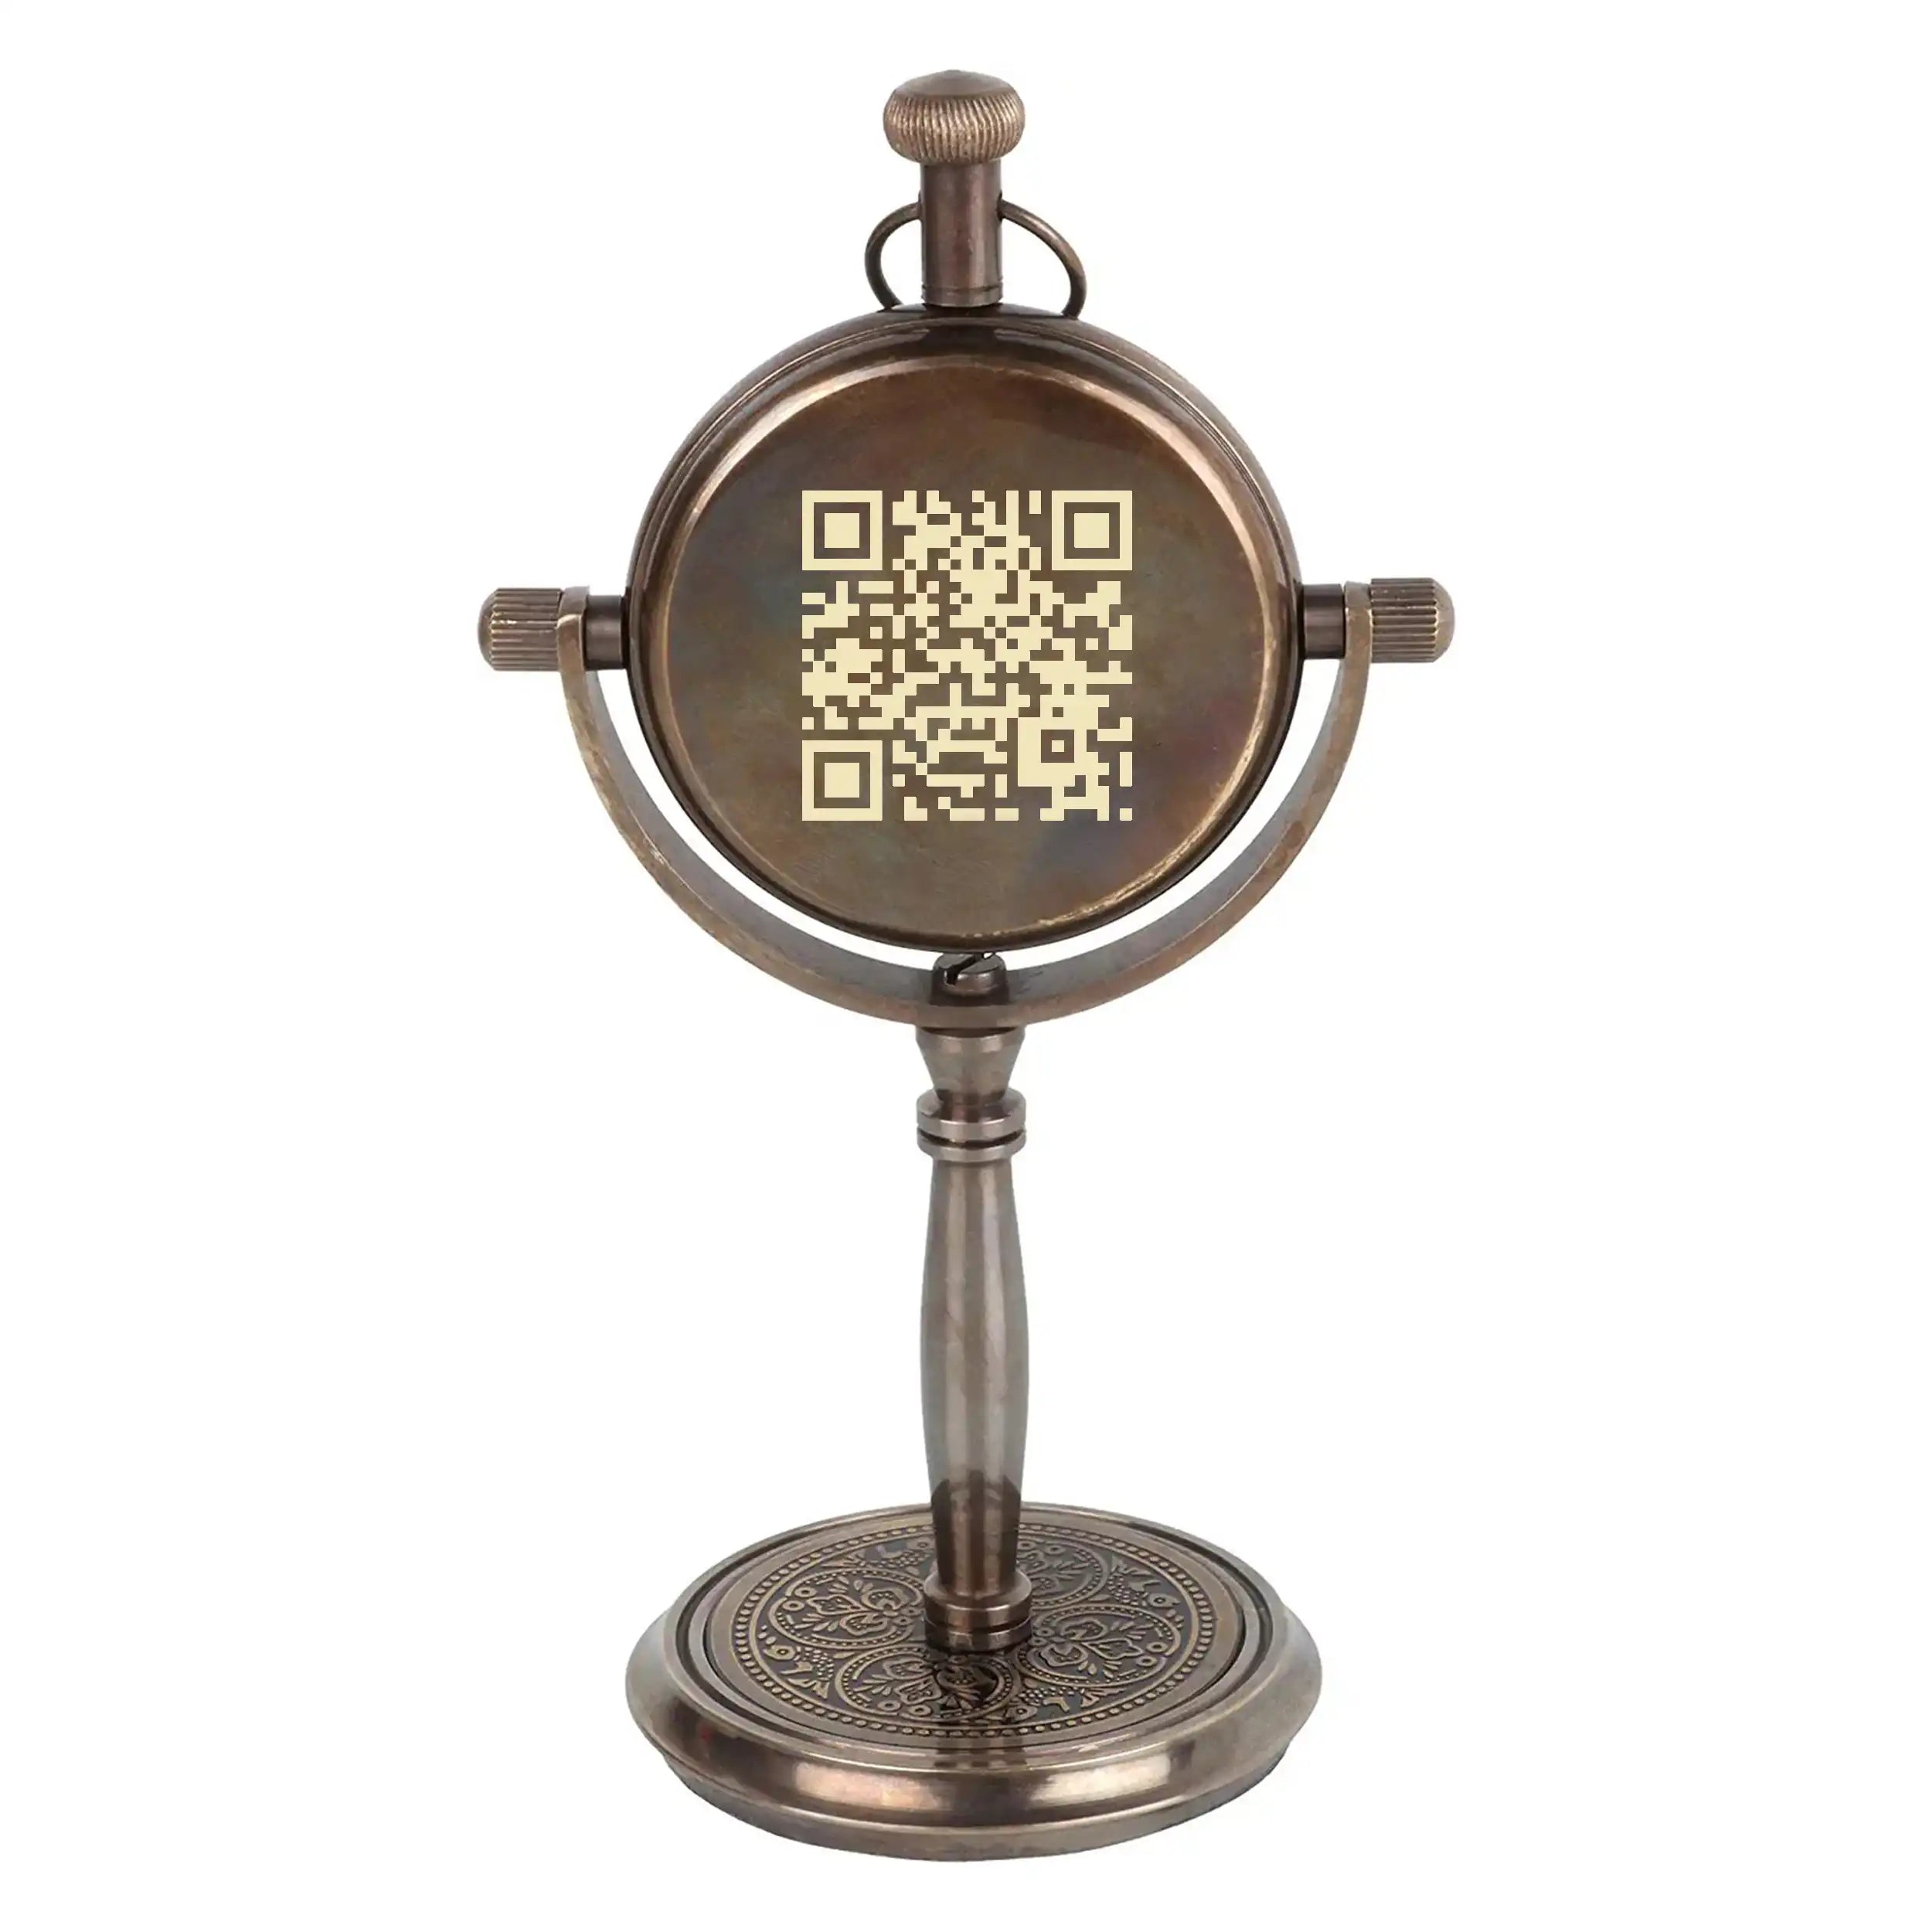 Personalized Retirement Table Clock with QR Code